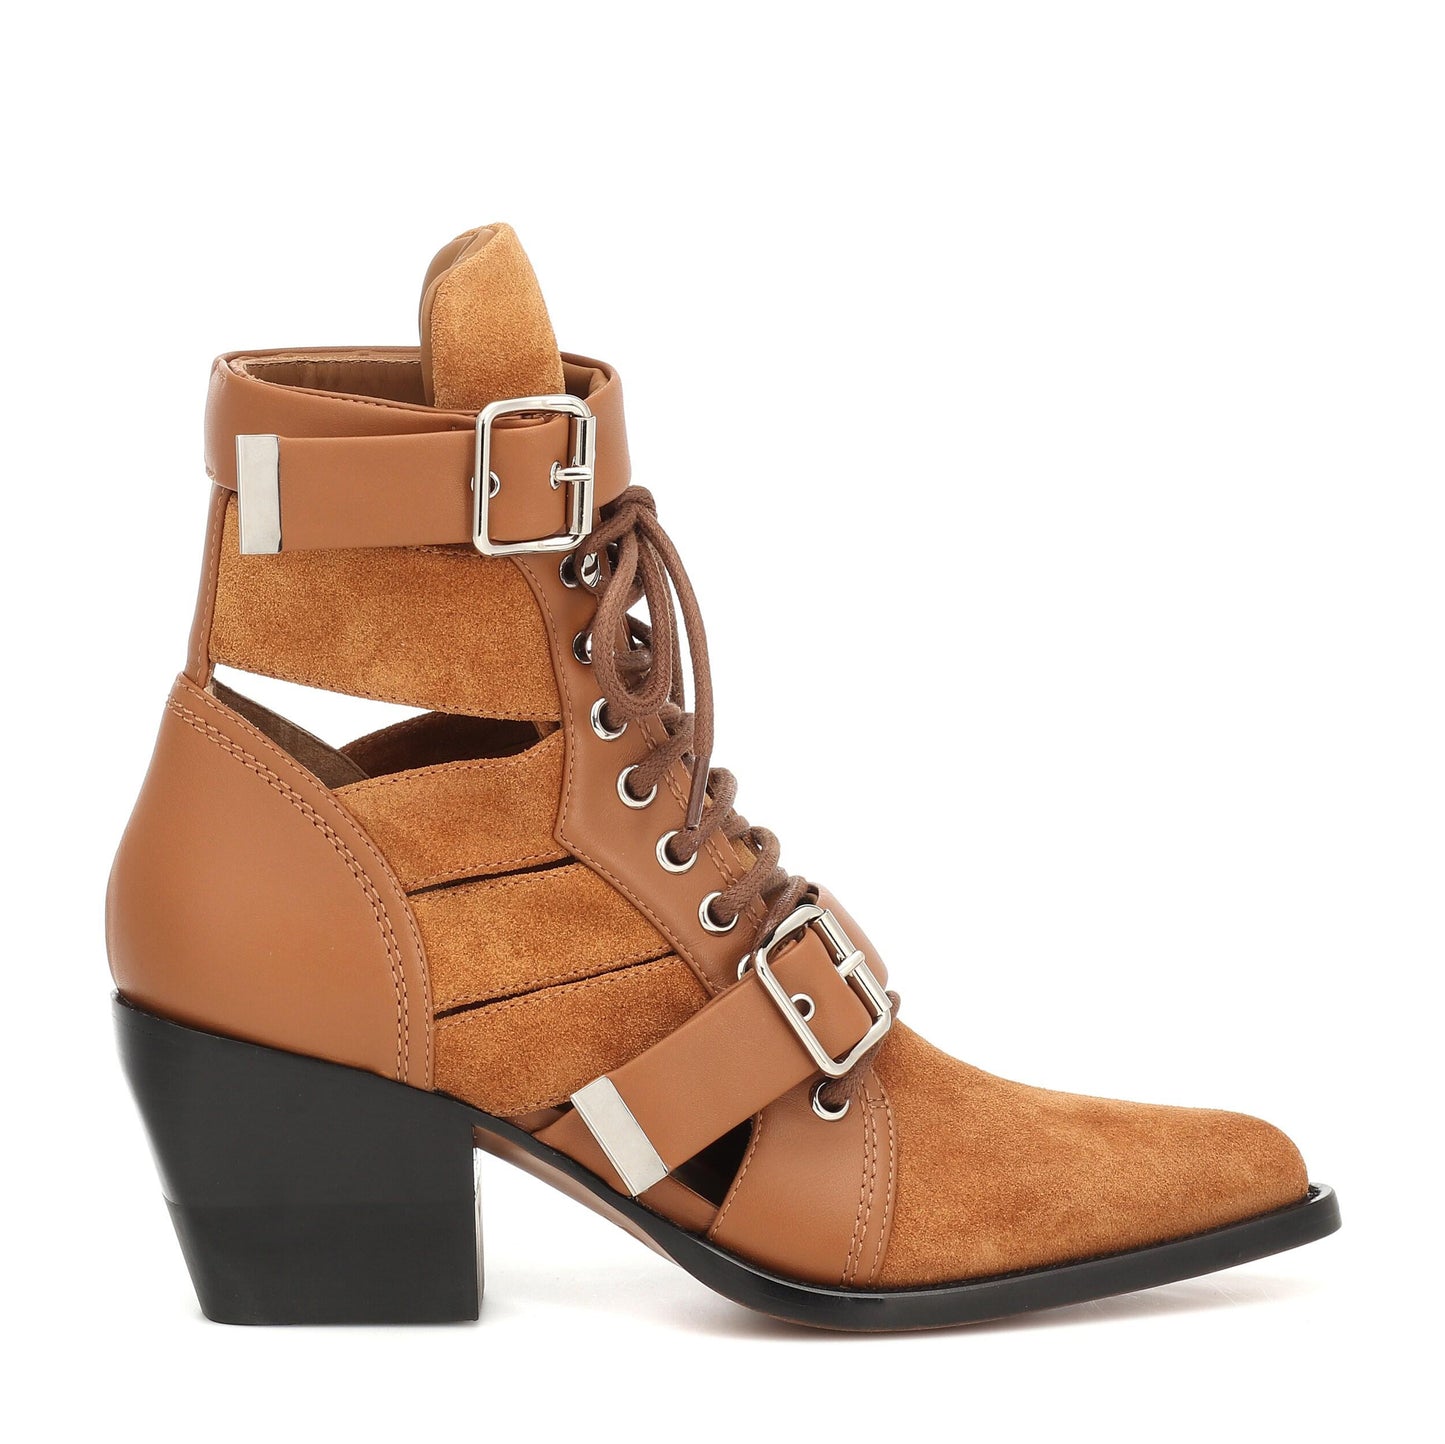 Chloe Rylie Boots in Tan Suede, size 41 (fits 10/10.5)